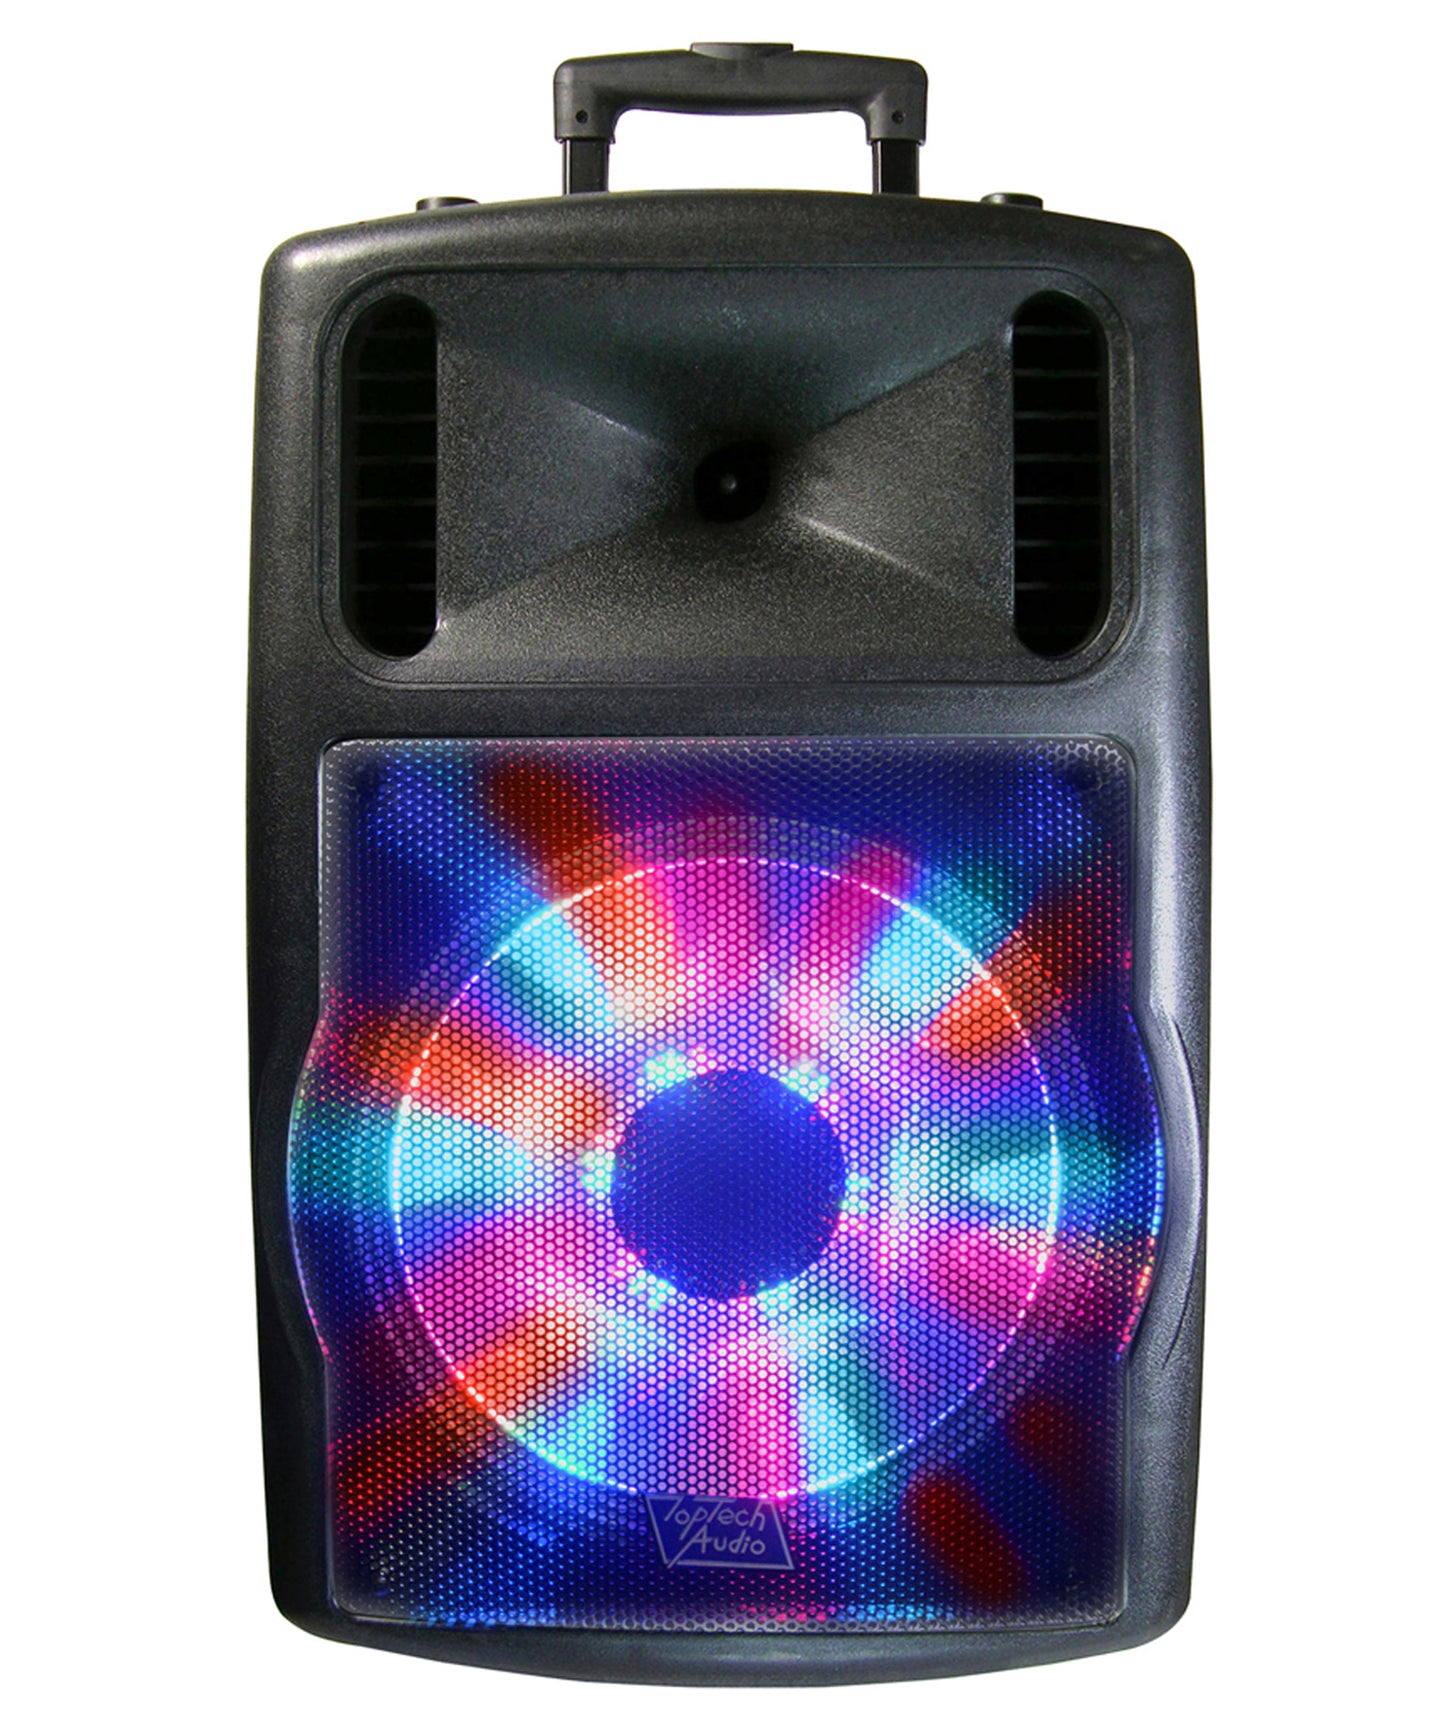 Fully Amplified Portable 1600 Watts Peak Power 12” Speaker with LED LIGHT